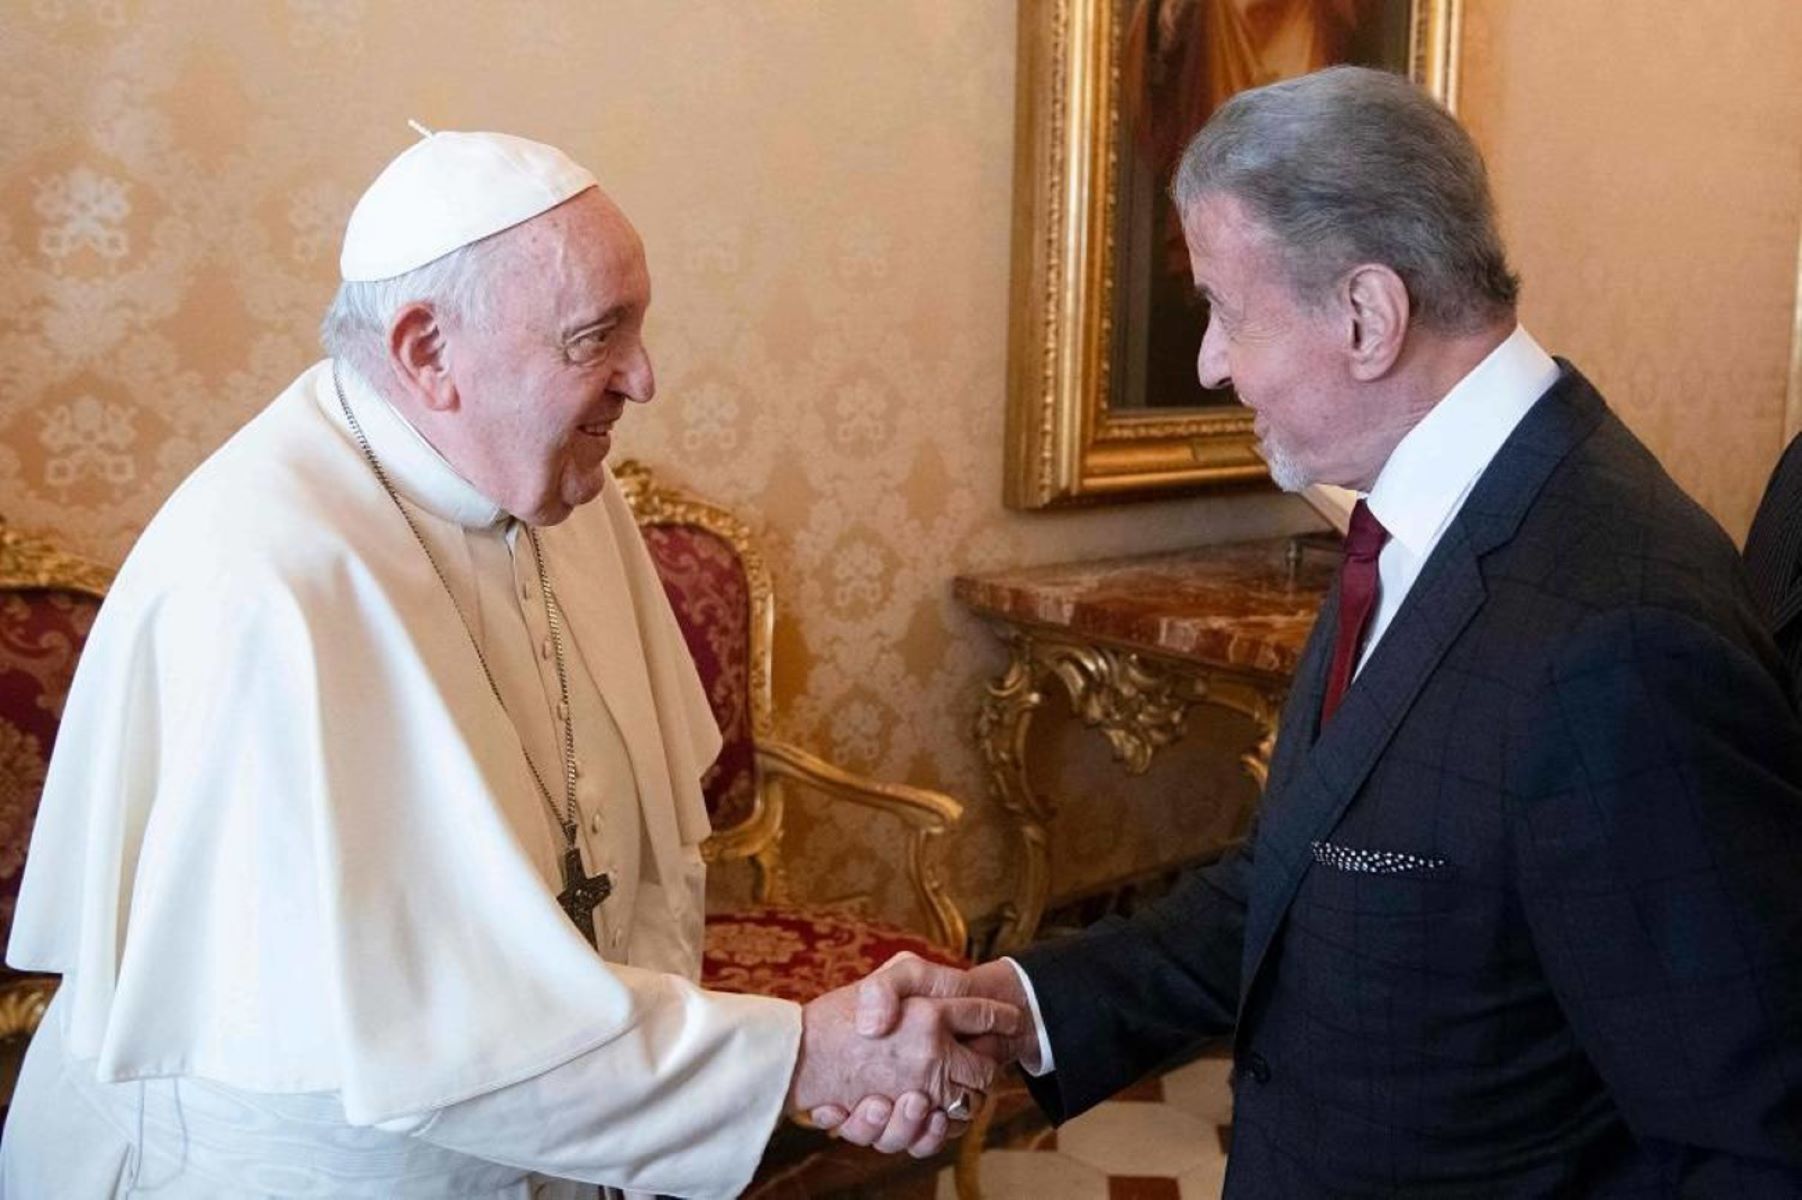 sylvester-stallone-meets-pope-francis-at-vatican-engages-in-friendly-shadowboxing